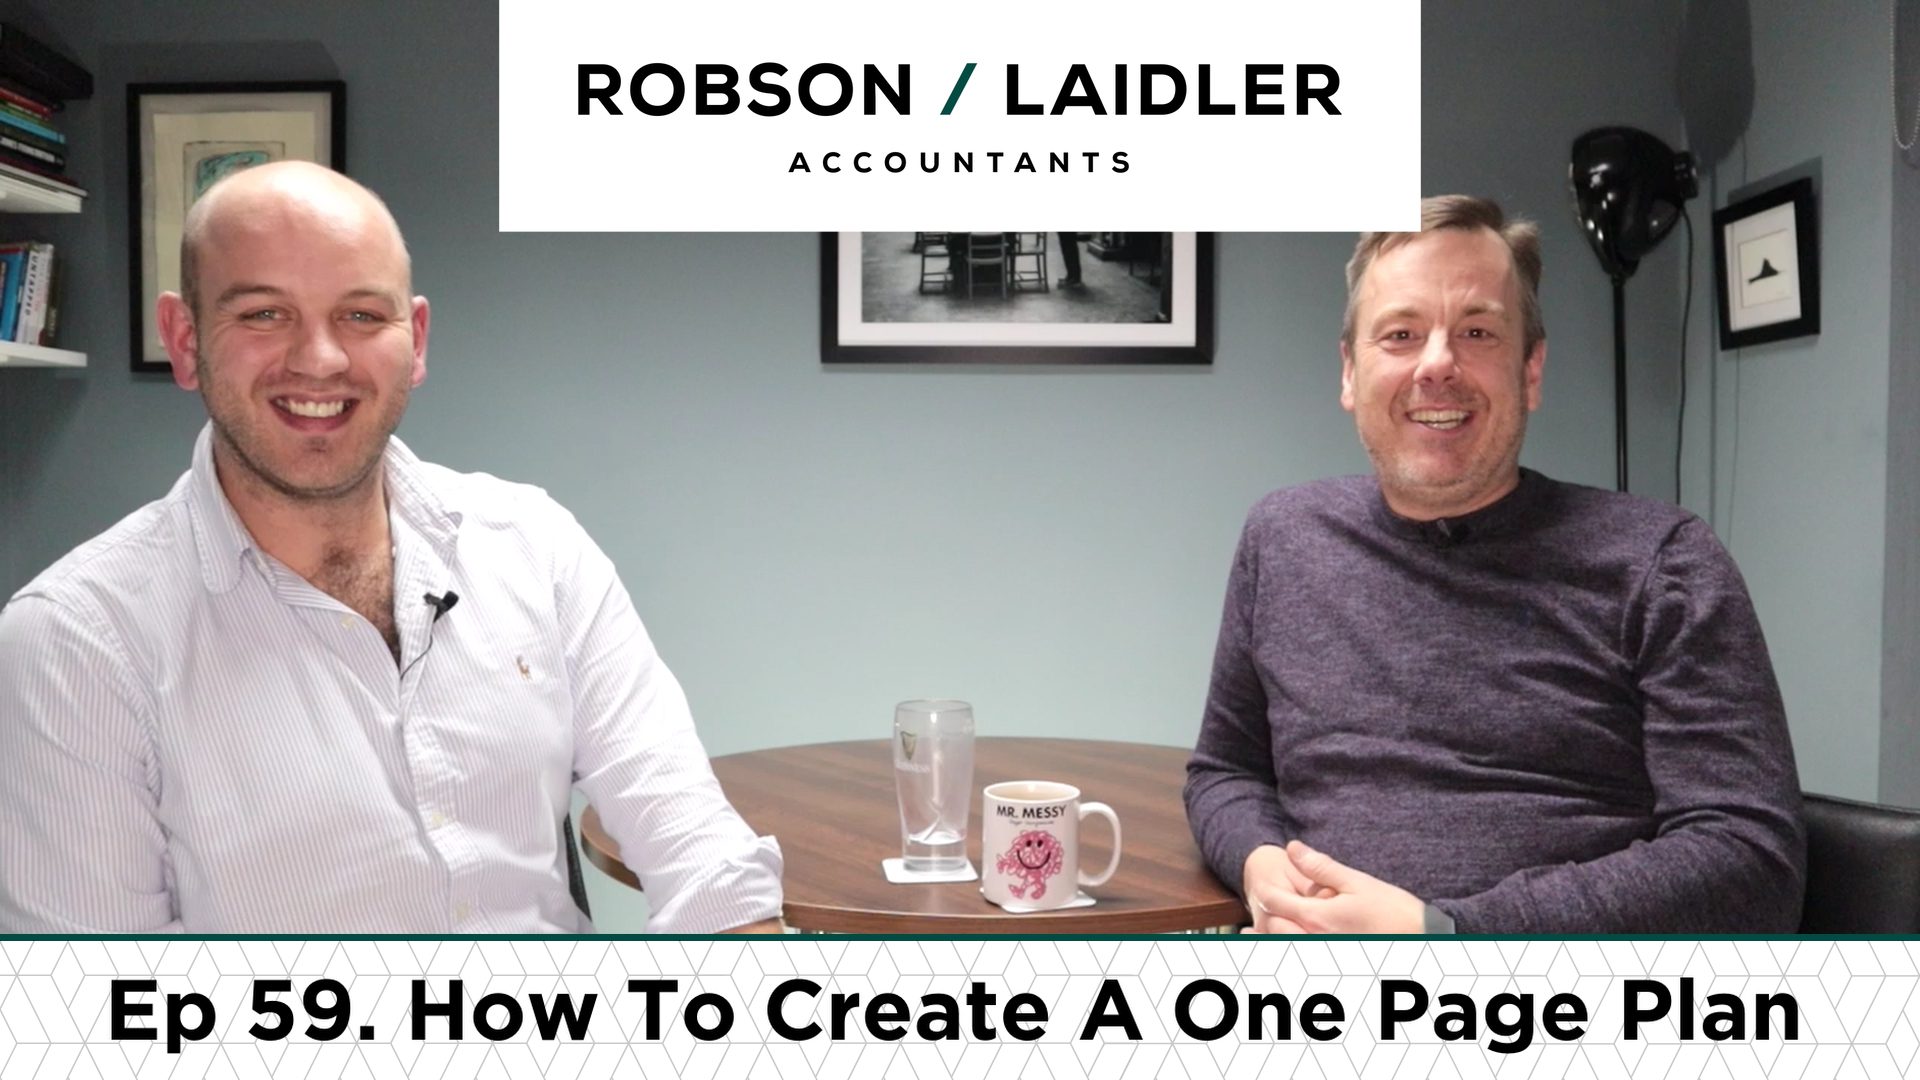 Create a one page plan podcast